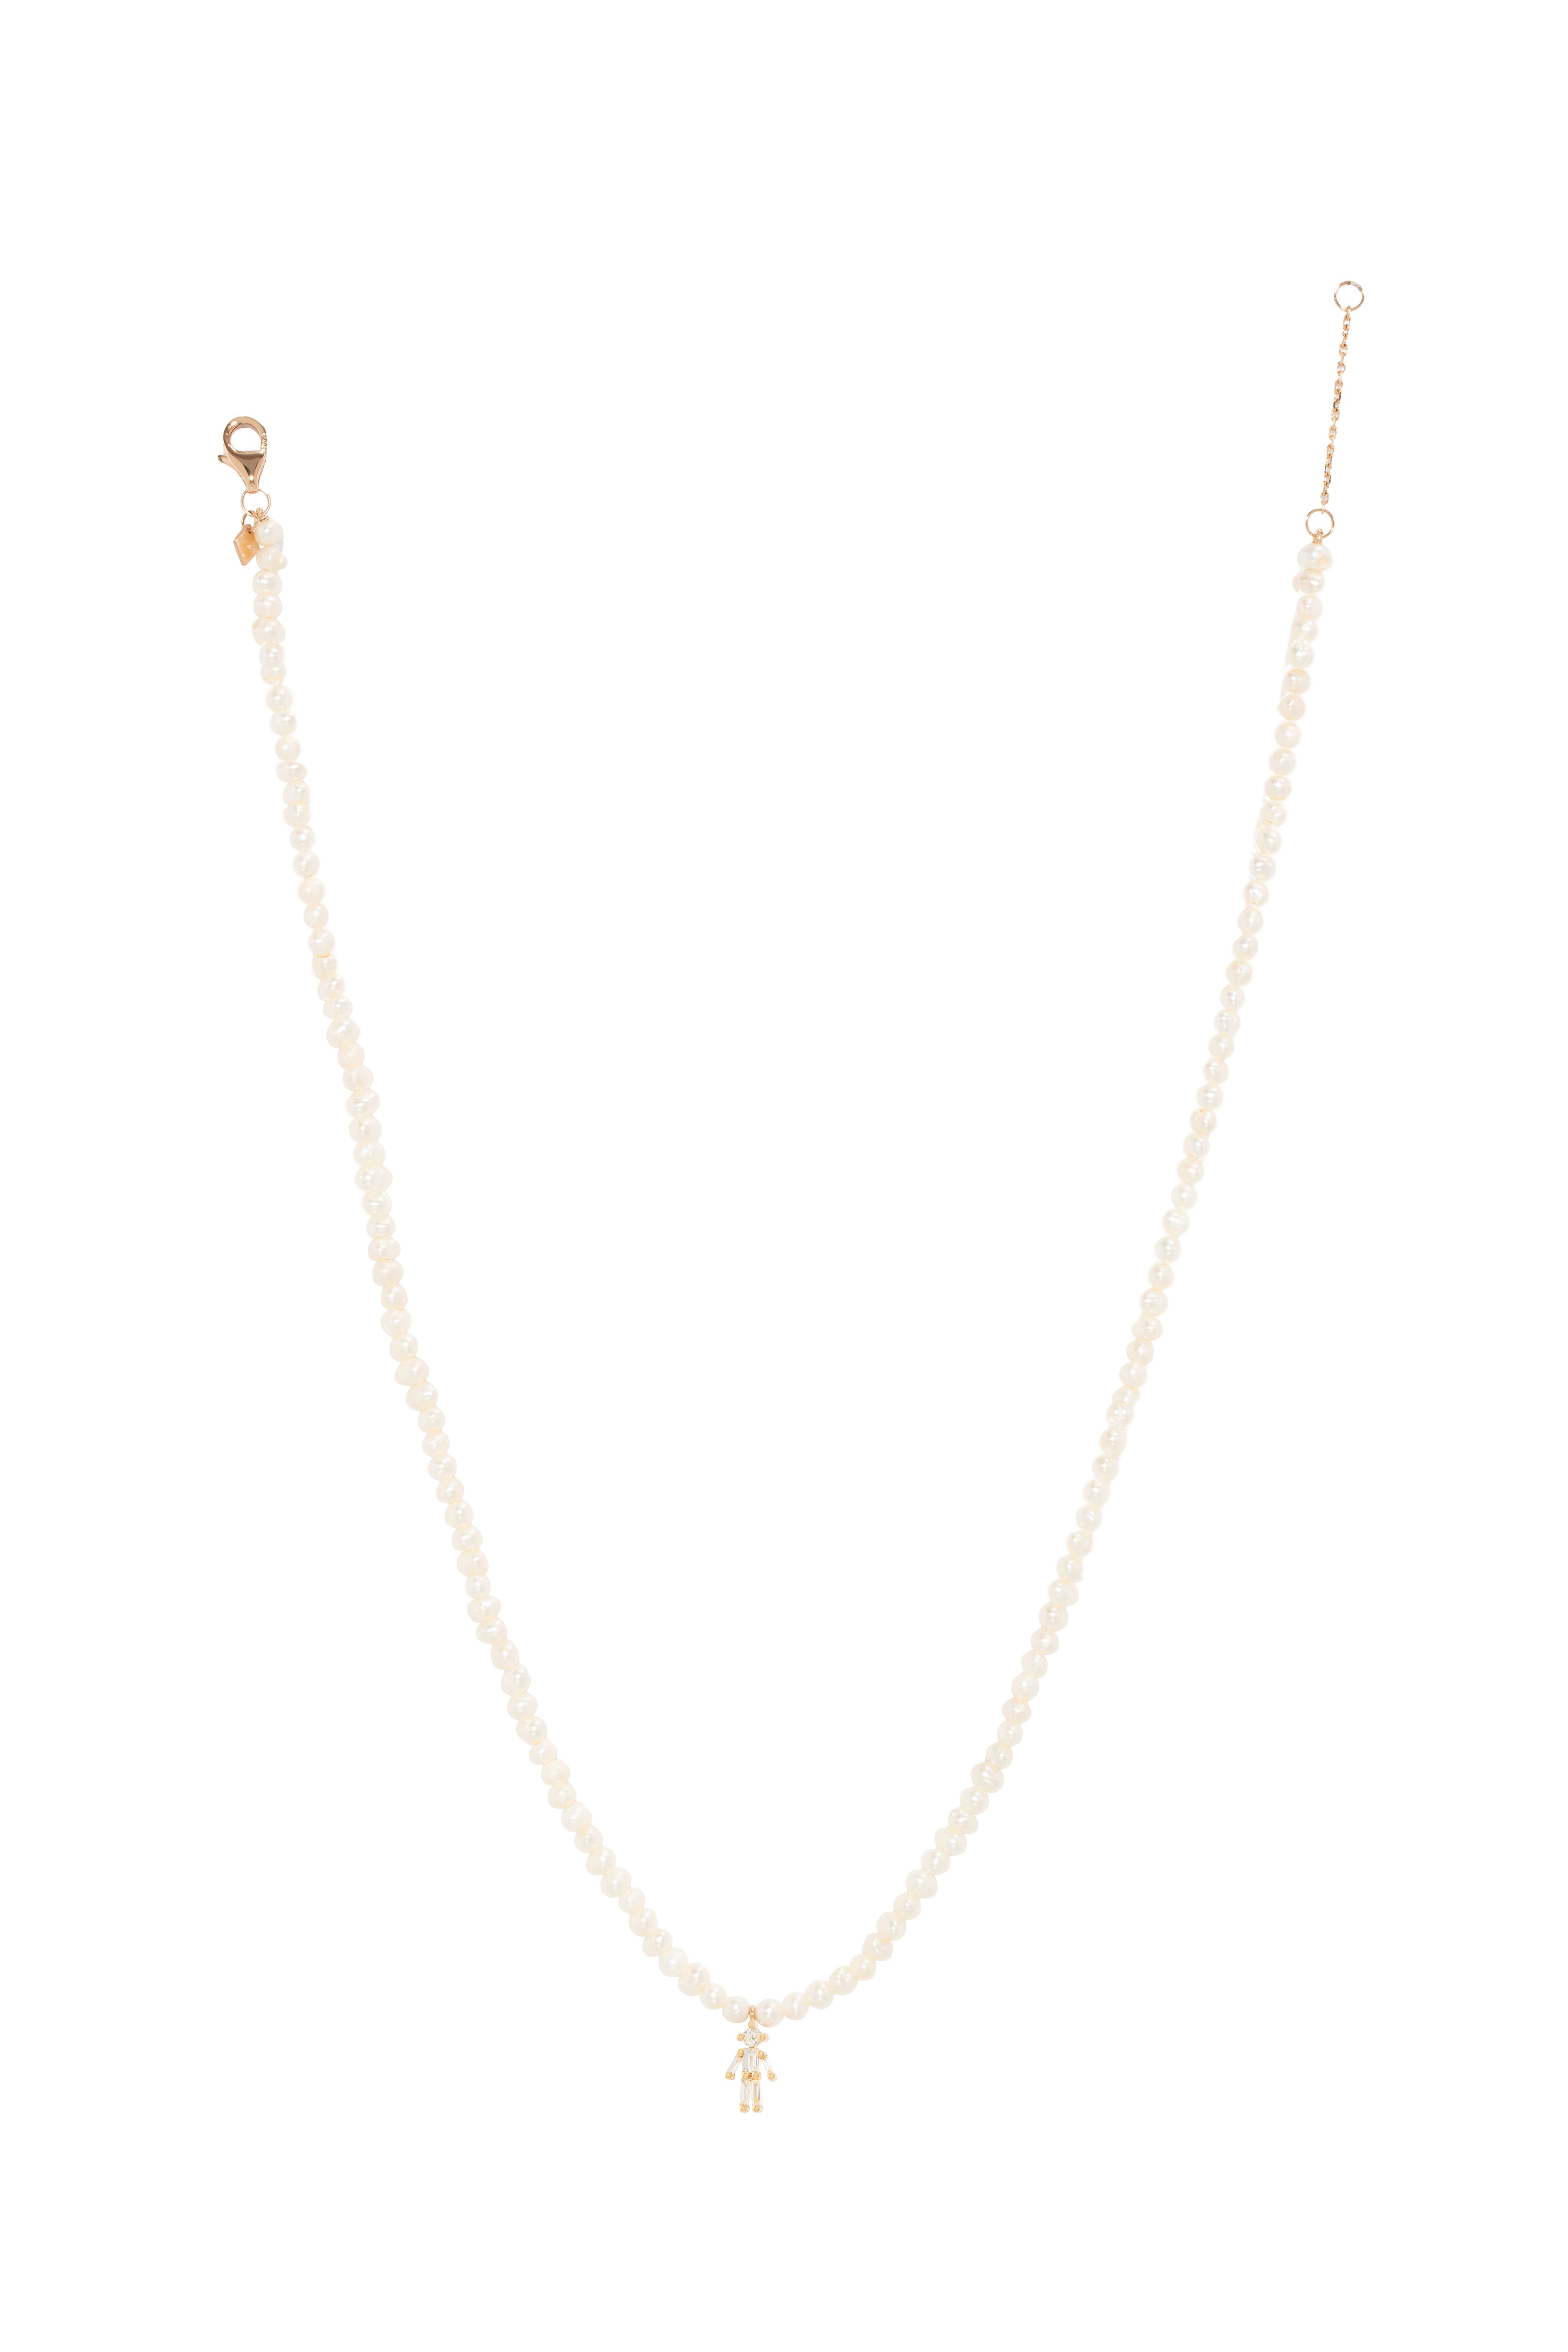 Diamonds and 18Kt yellow / rose / white gold simple girl rainbow necklace